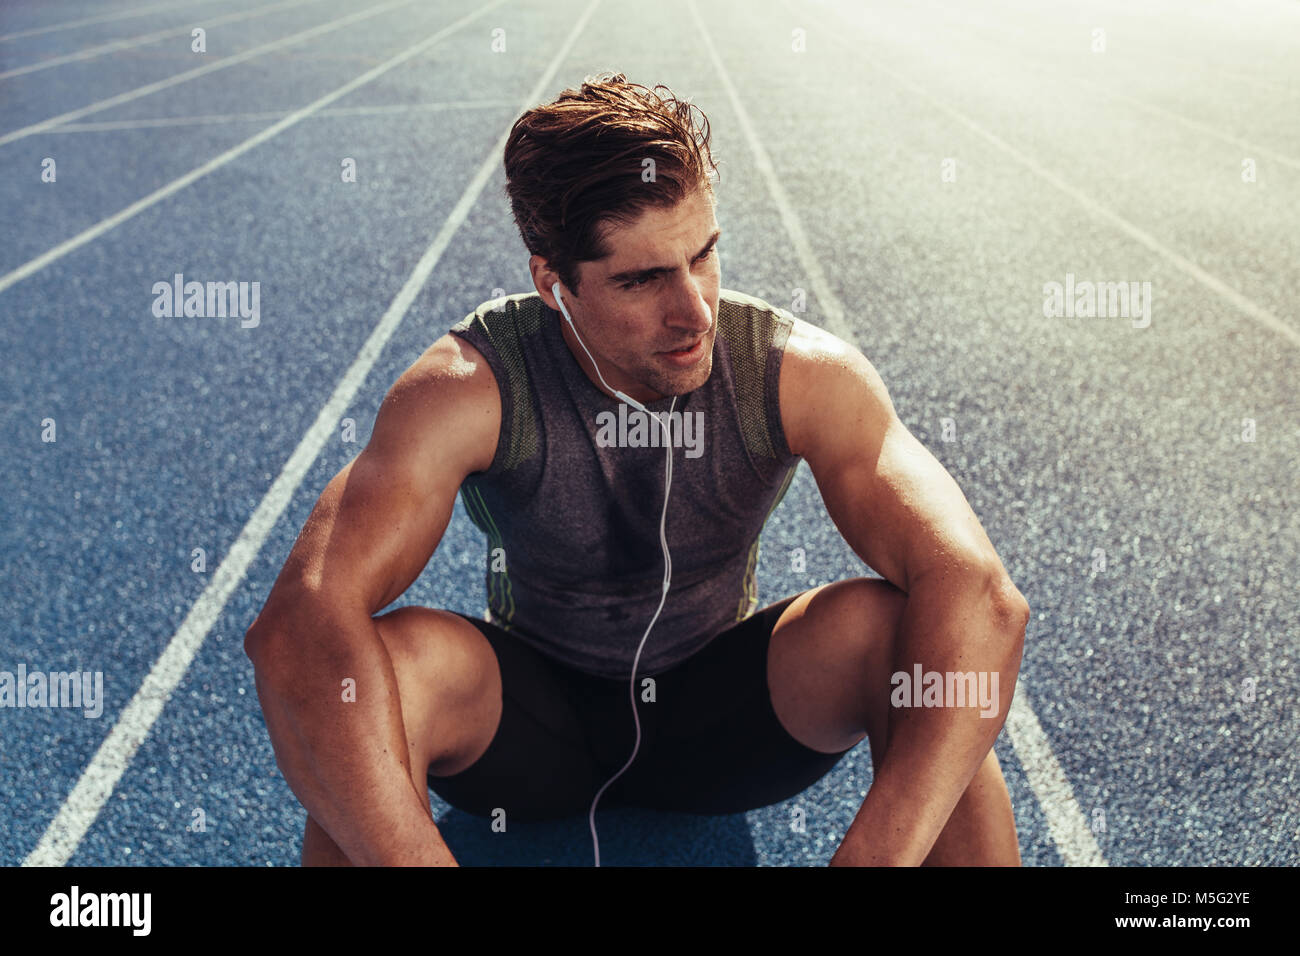 Close up of an athlete sitting on a running track listening to music. Runner wearing earphones sitting and relaxing on the running track. Stock Photo